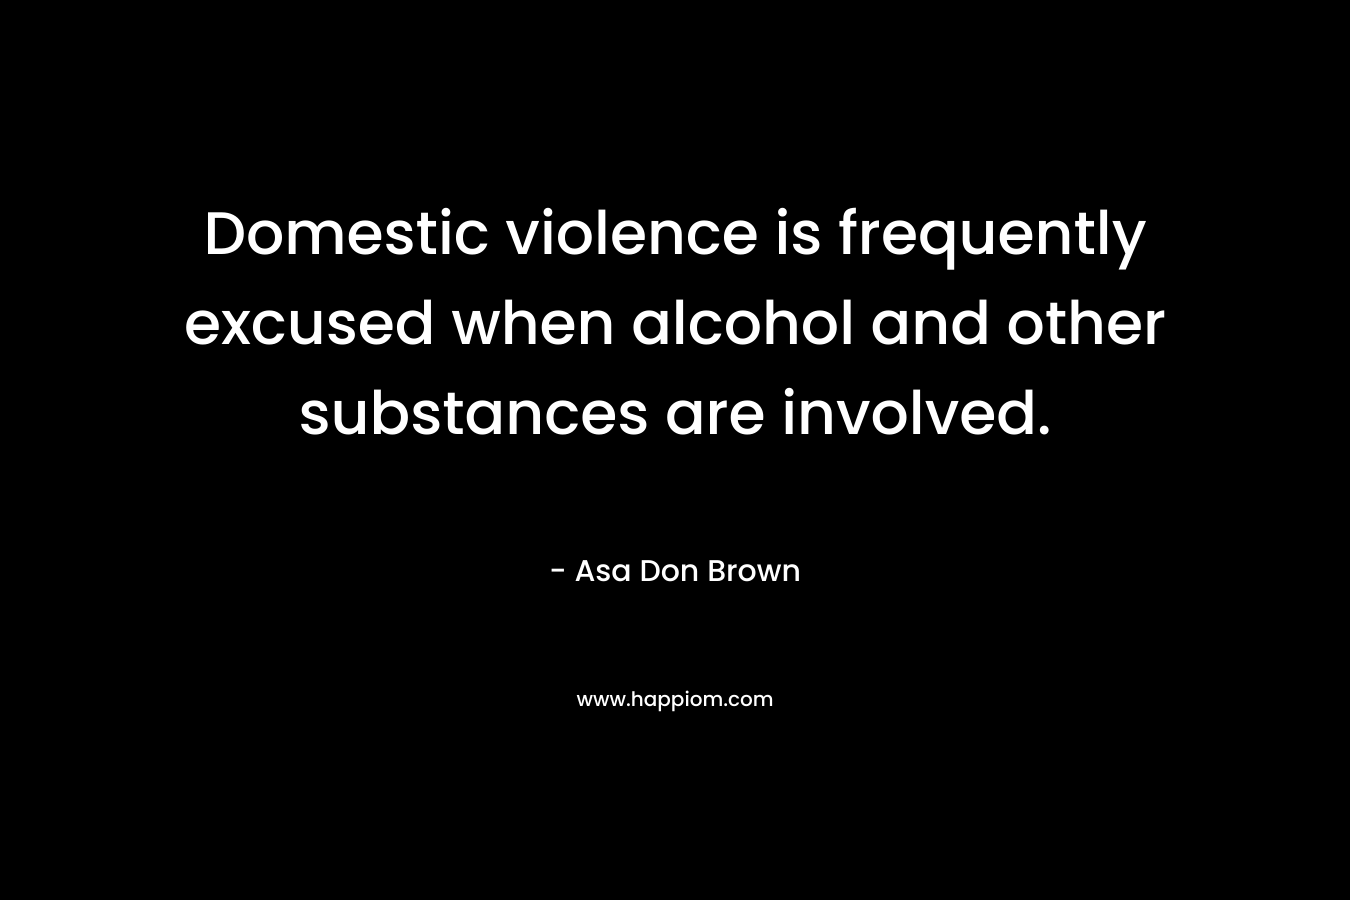 Domestic violence is frequently excused when alcohol and other substances are involved. – Asa Don Brown